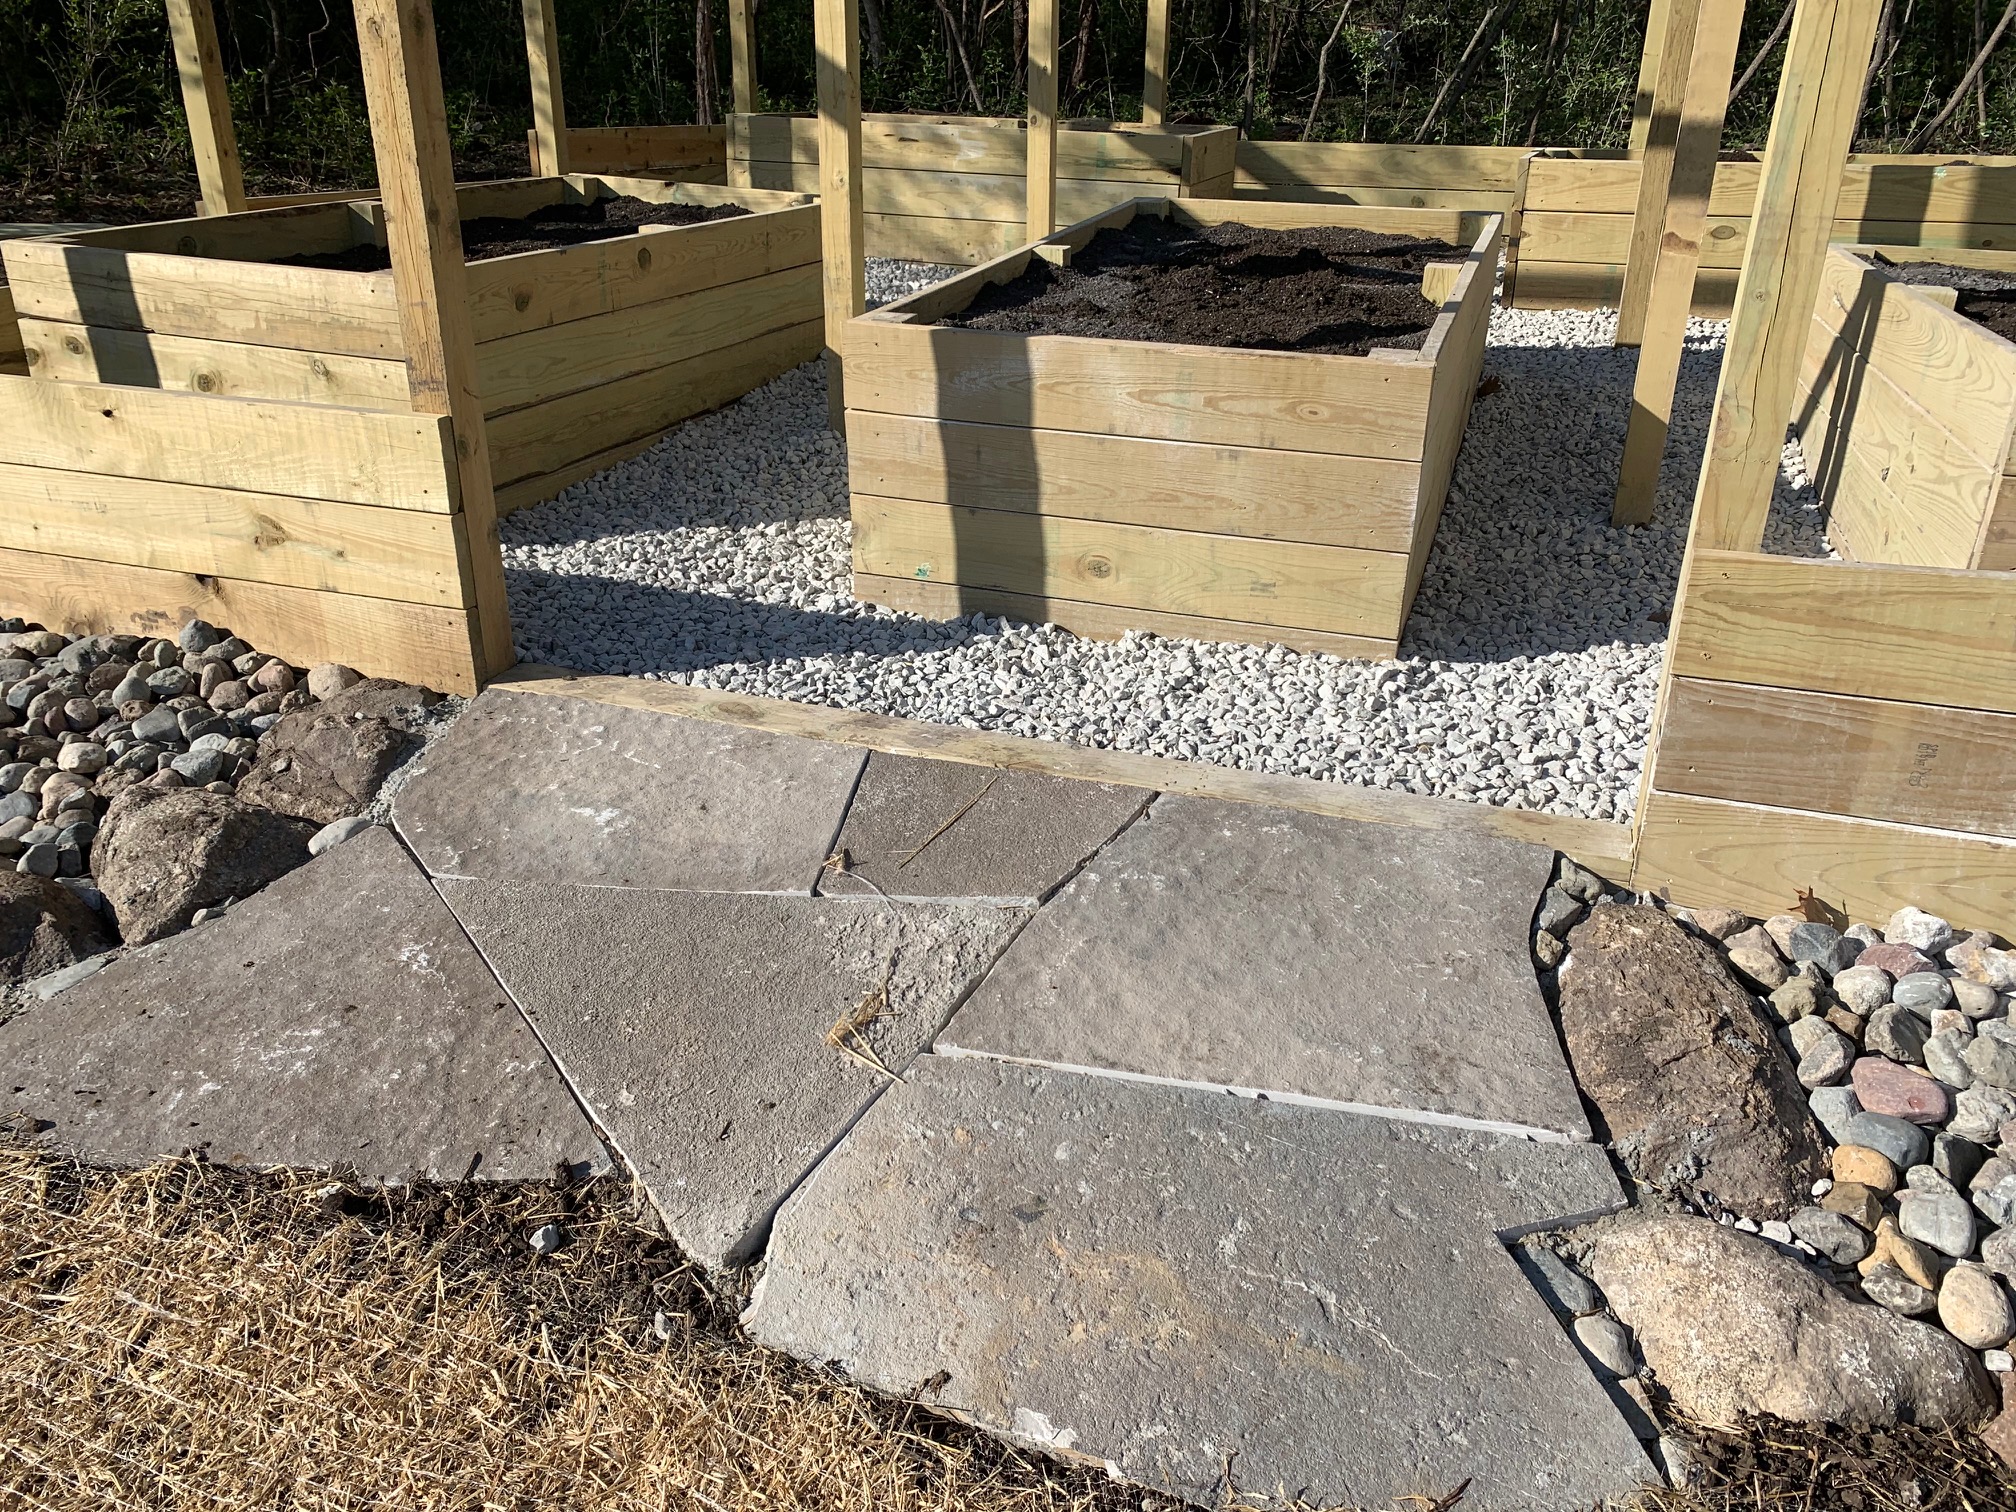 stone-path-leading-up-to-raised-garden-beds